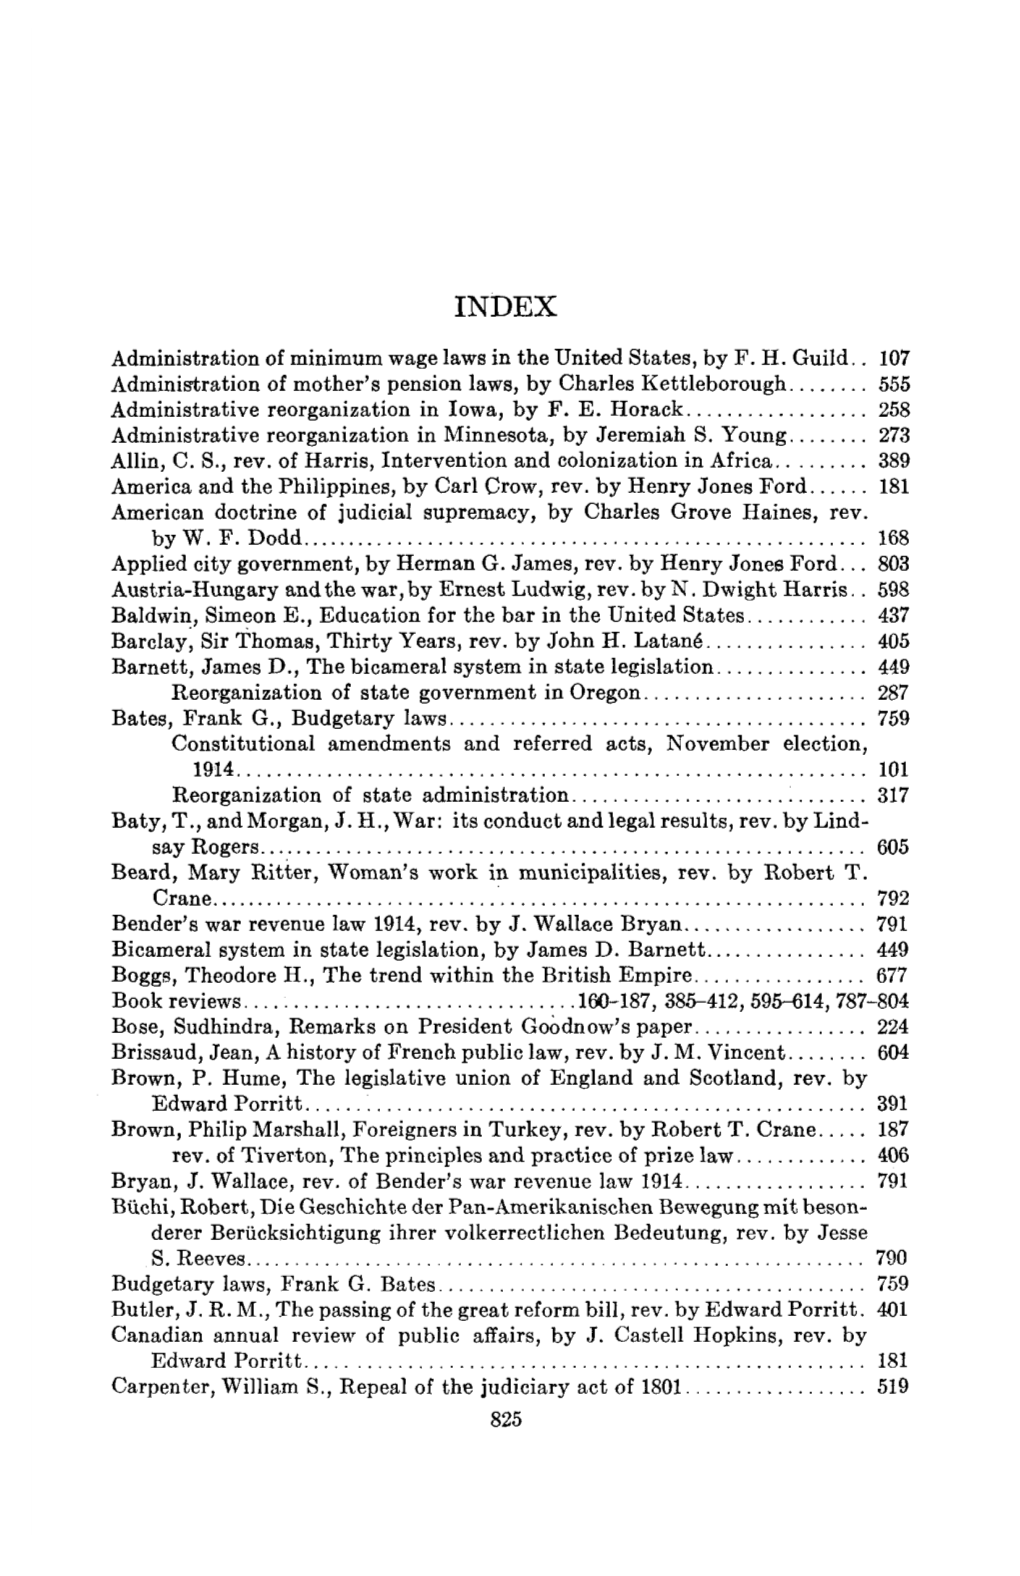 Administration of Minimum Wage Laws in the United States, by F. H. Guild